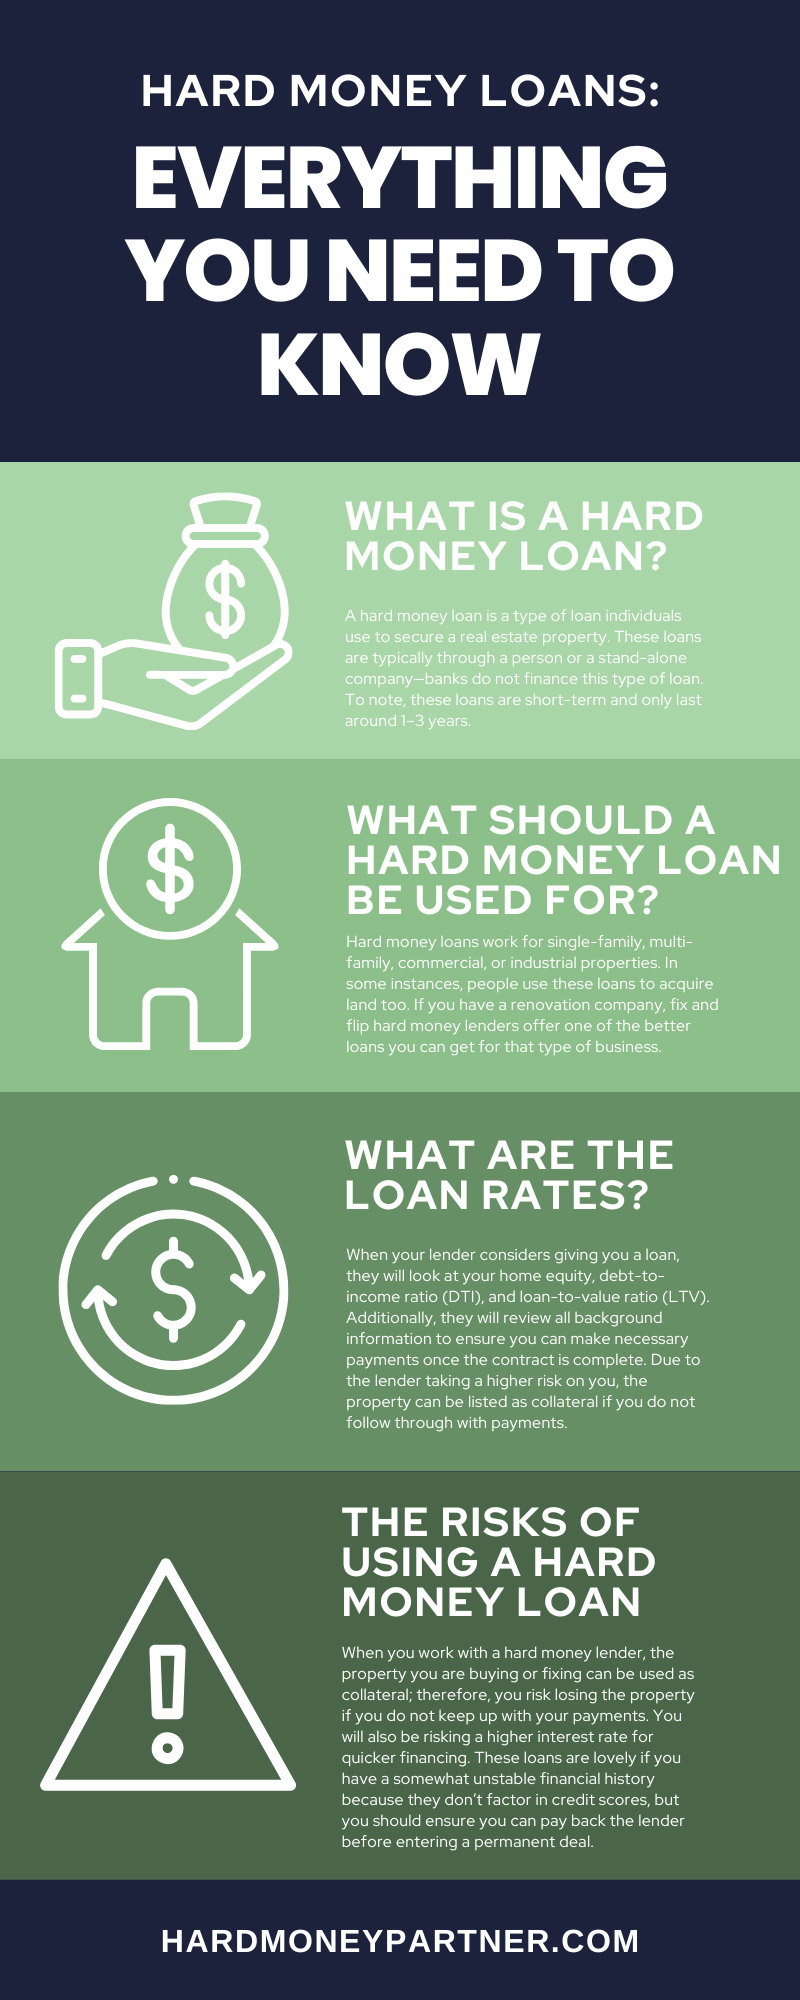 Hard Money Loans: Everything You Need To Know